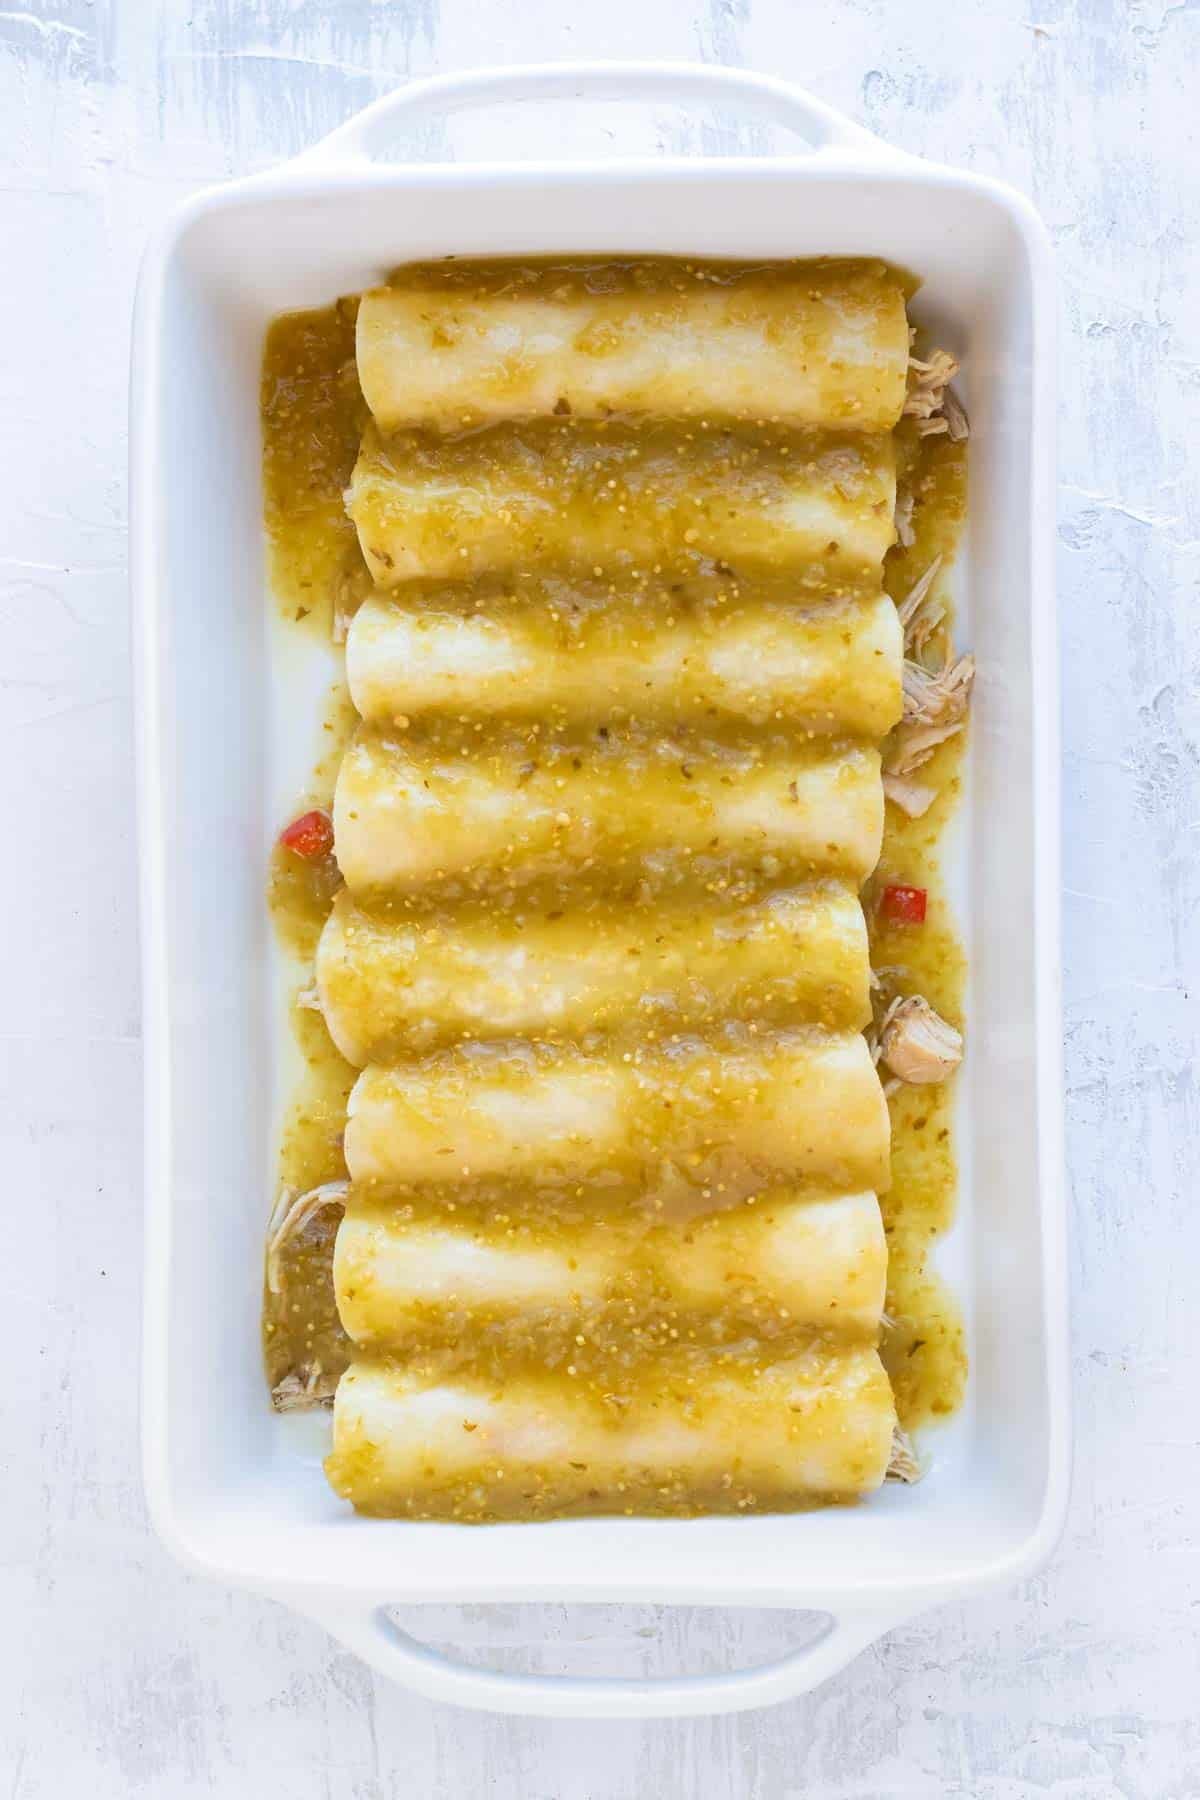 Enchiladas are covered with green sauce.